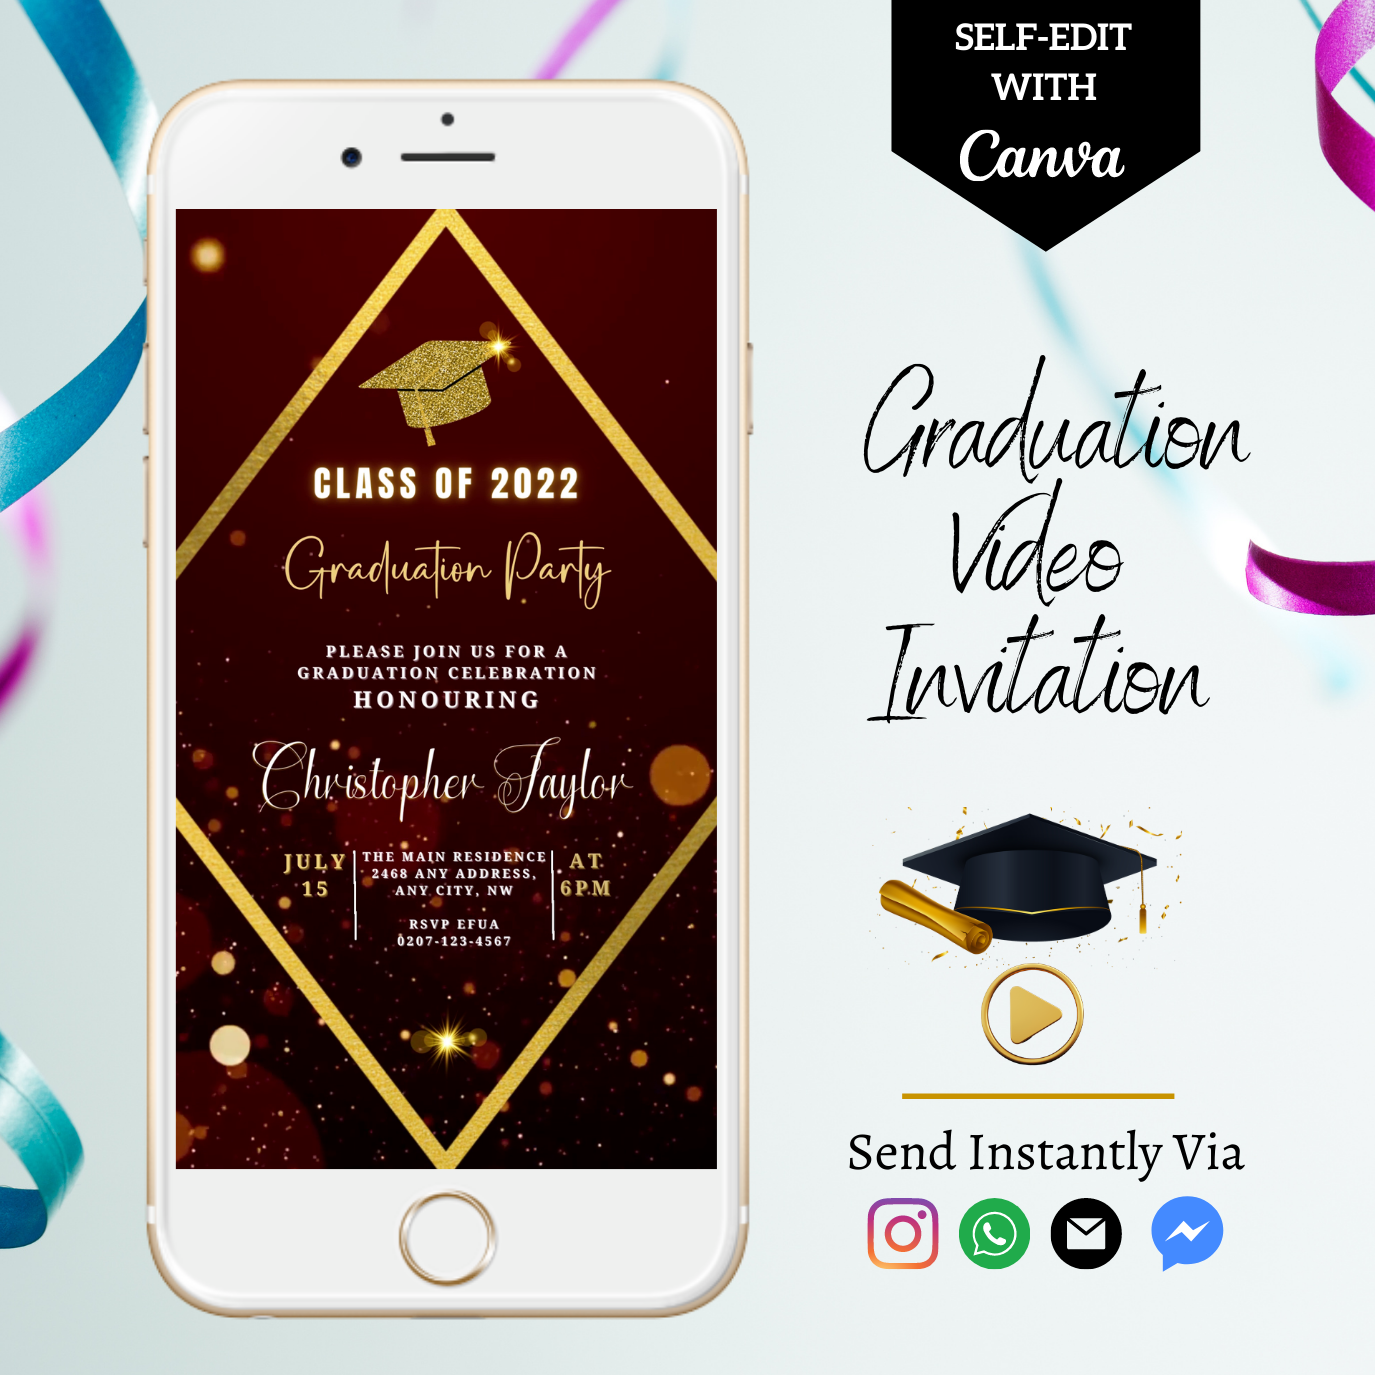 Customizable Burgundy Gold Glitter Graduation Video Invitation template displayed on a smartphone, showcasing graduation-themed design elements for digital editing and sharing.